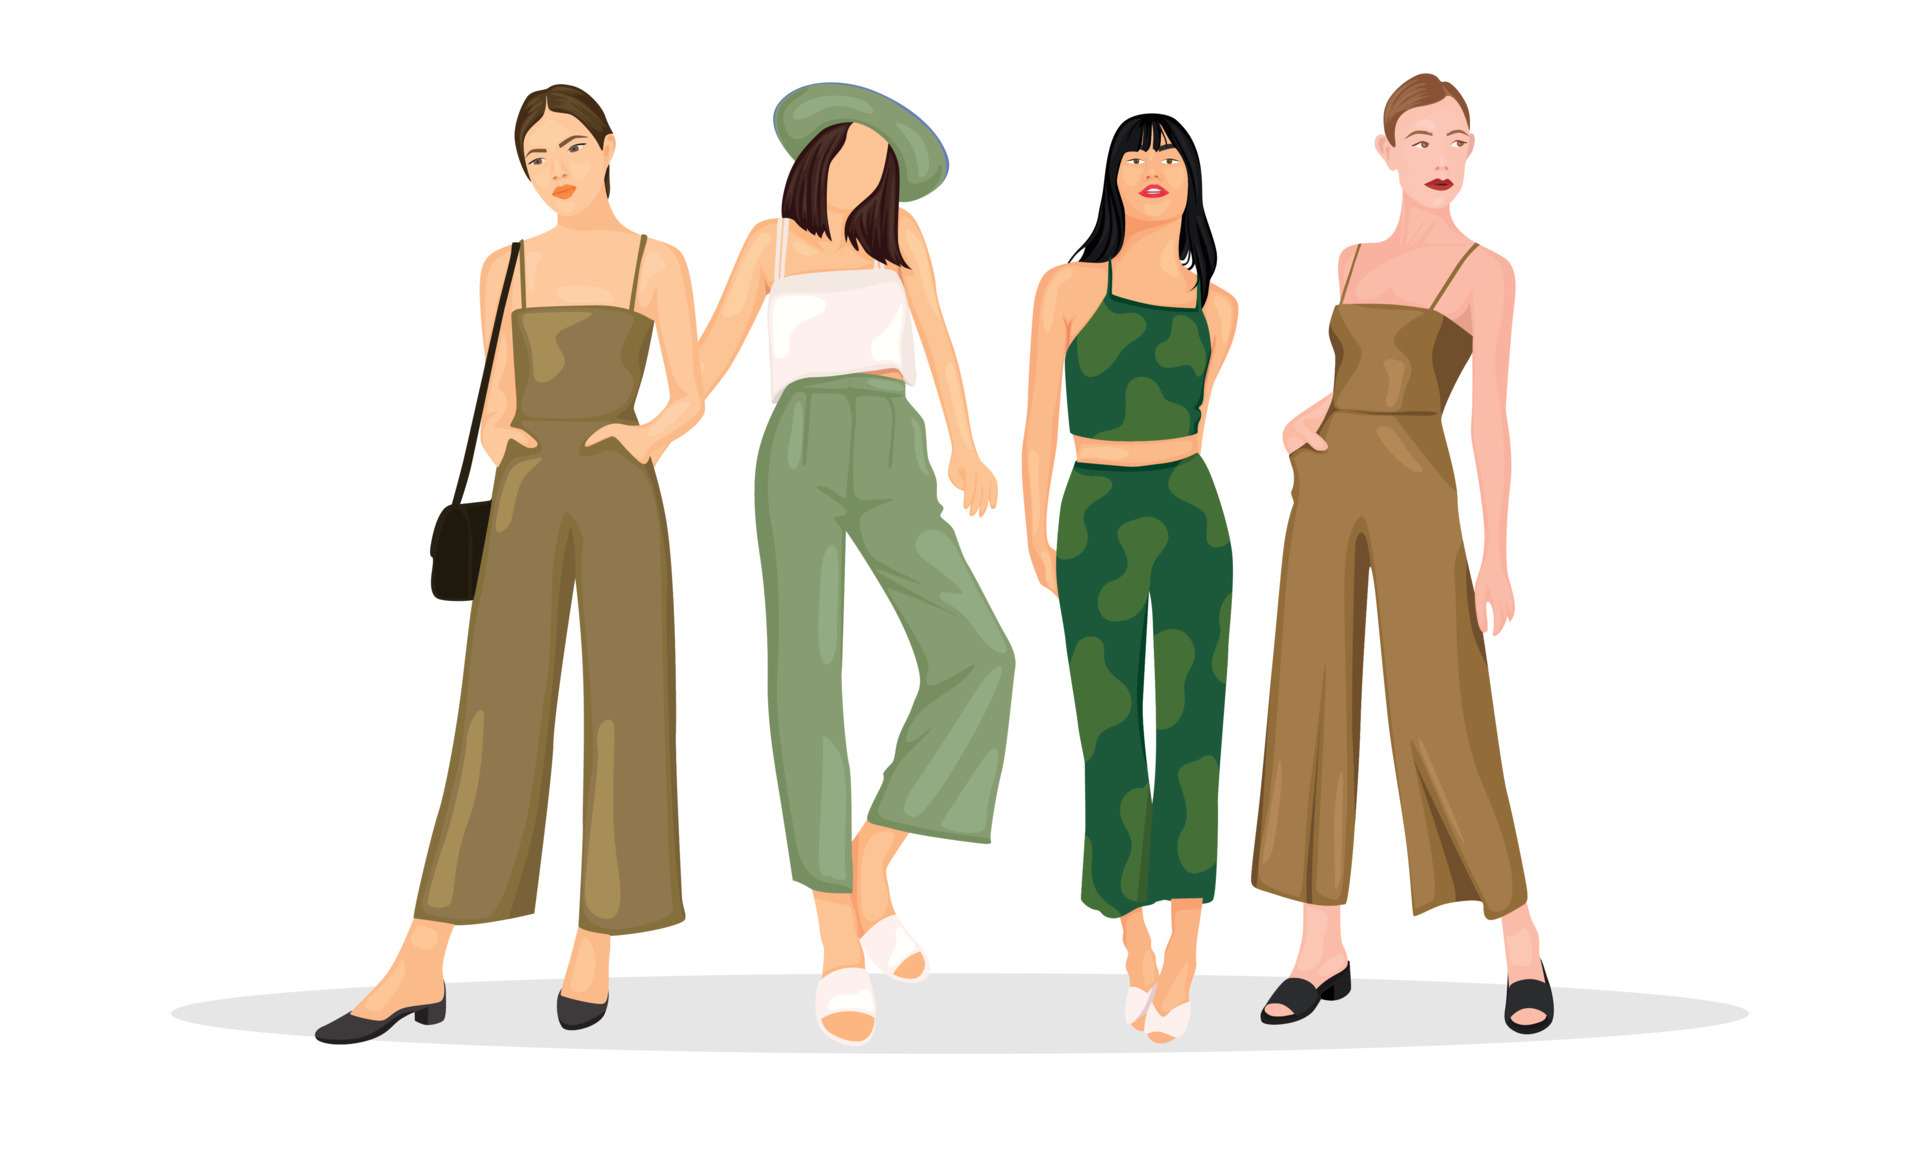 https://static.vecteezy.com/system/resources/previews/006/410/272/original/girls-are-standing-poses-full-body-model-famous-gorgeous-pretty-business-woman-green-army-white-mint-colourful-jumpsuit-shirt-hat-hand-bag-free-vector.jpg